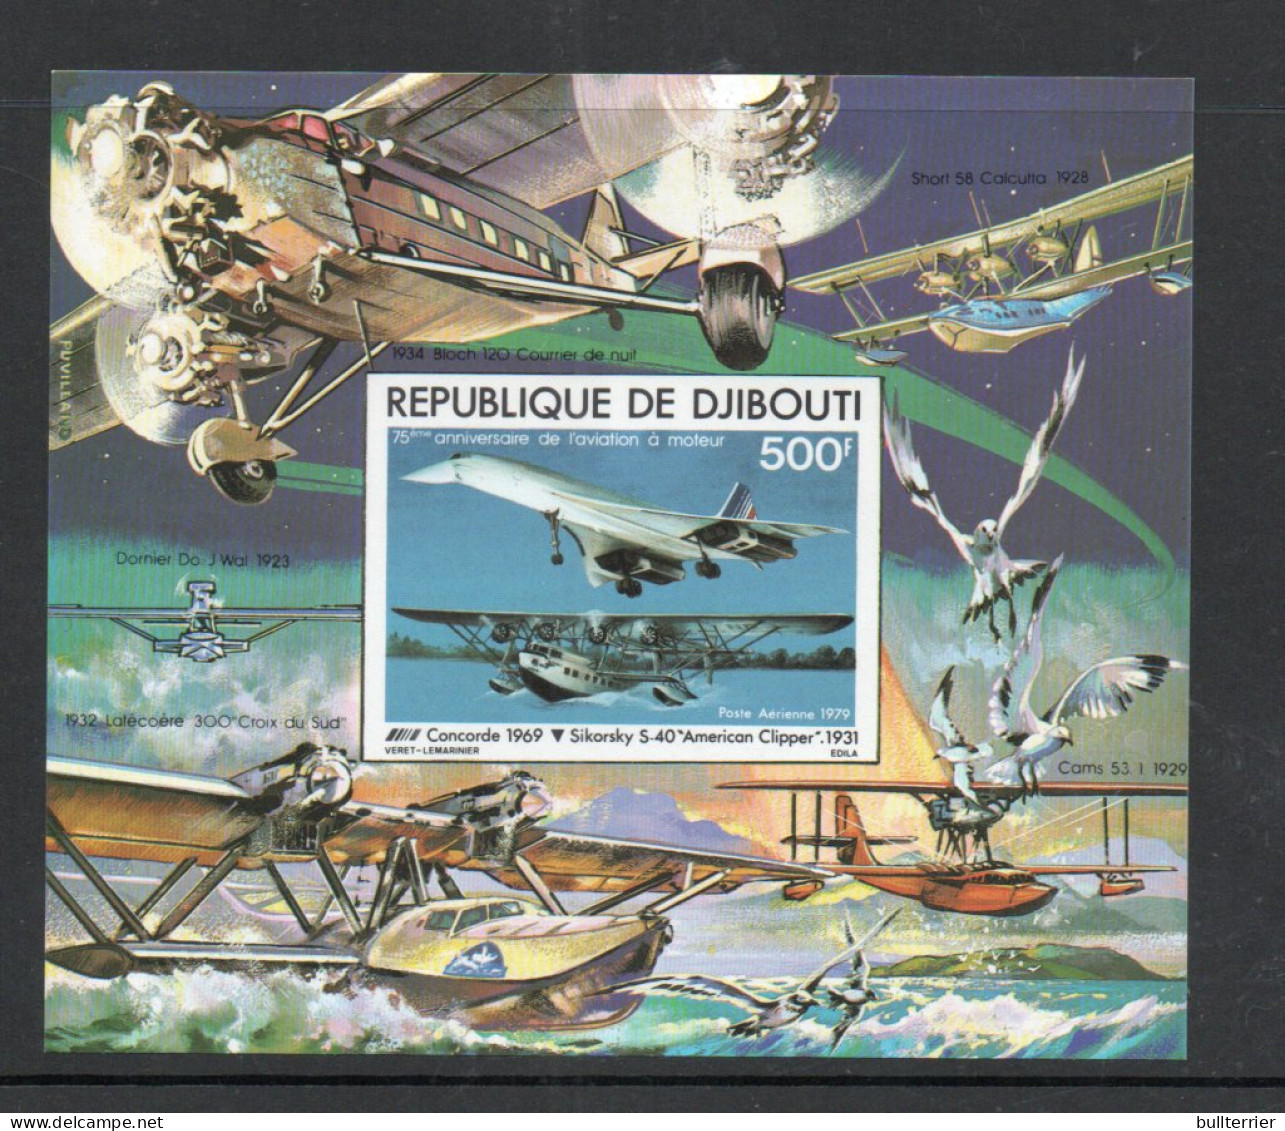 CONCORDE - DJIBOUTI -  1979 - CONCORDE LIMITED ISSUE IMPERFORATE SOUVENIR SHEET  MINT NEVER HINGED - Concorde